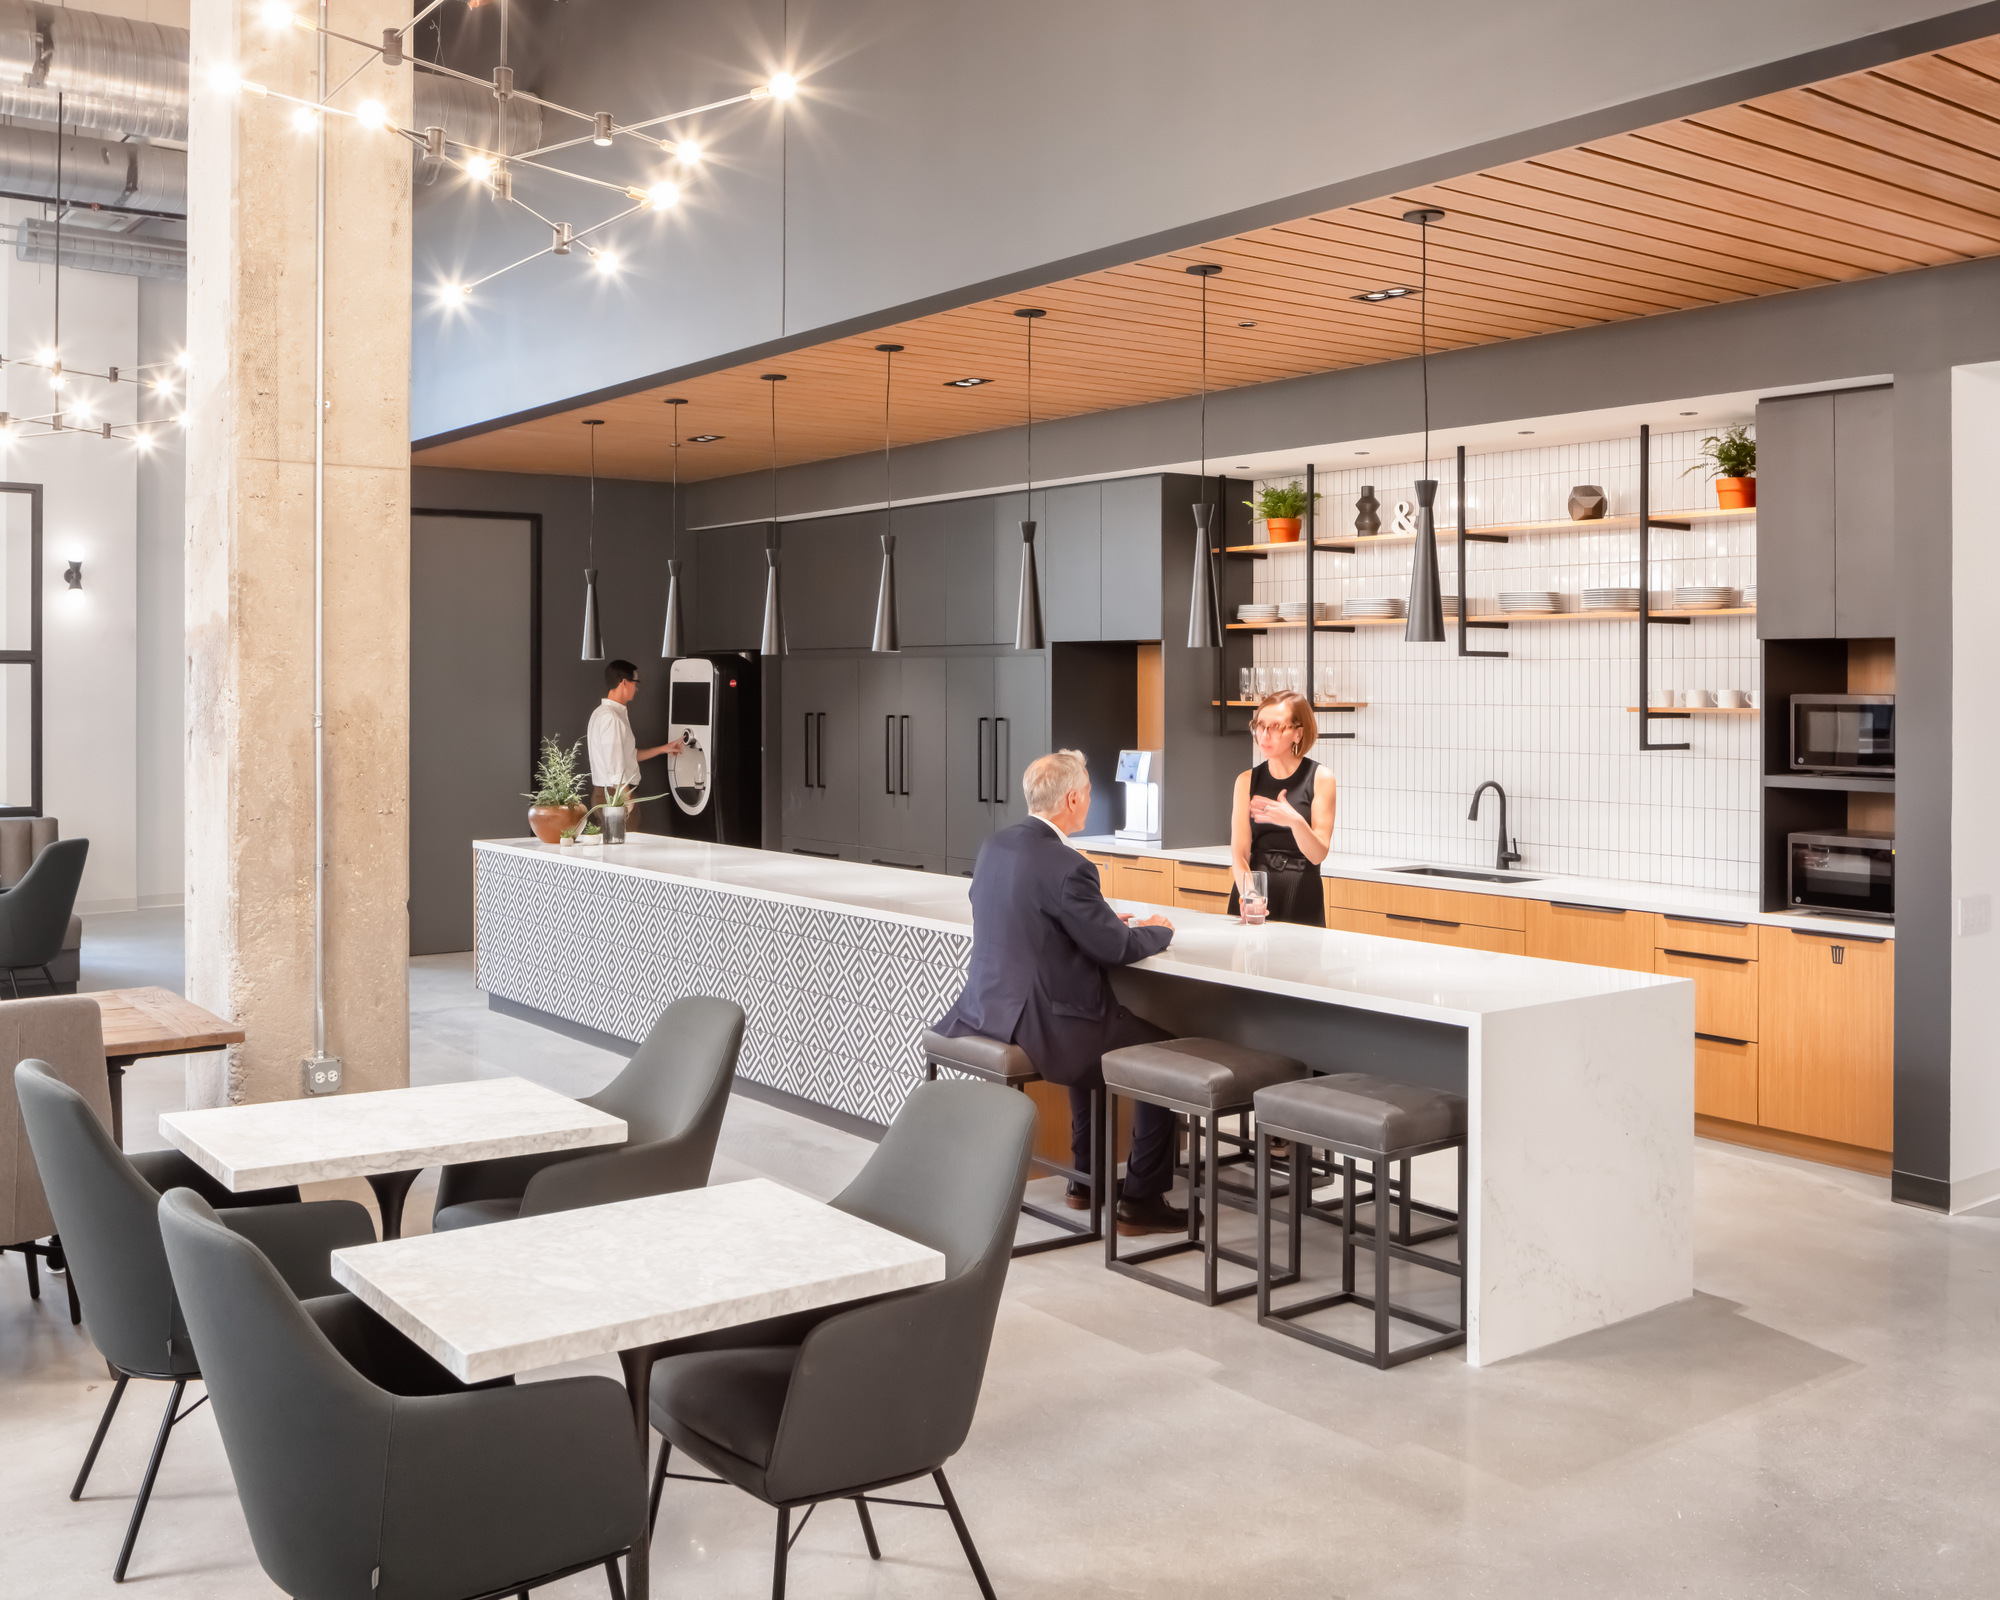 Ferrara Candy Company Offices - Chicago | Office Snapshots